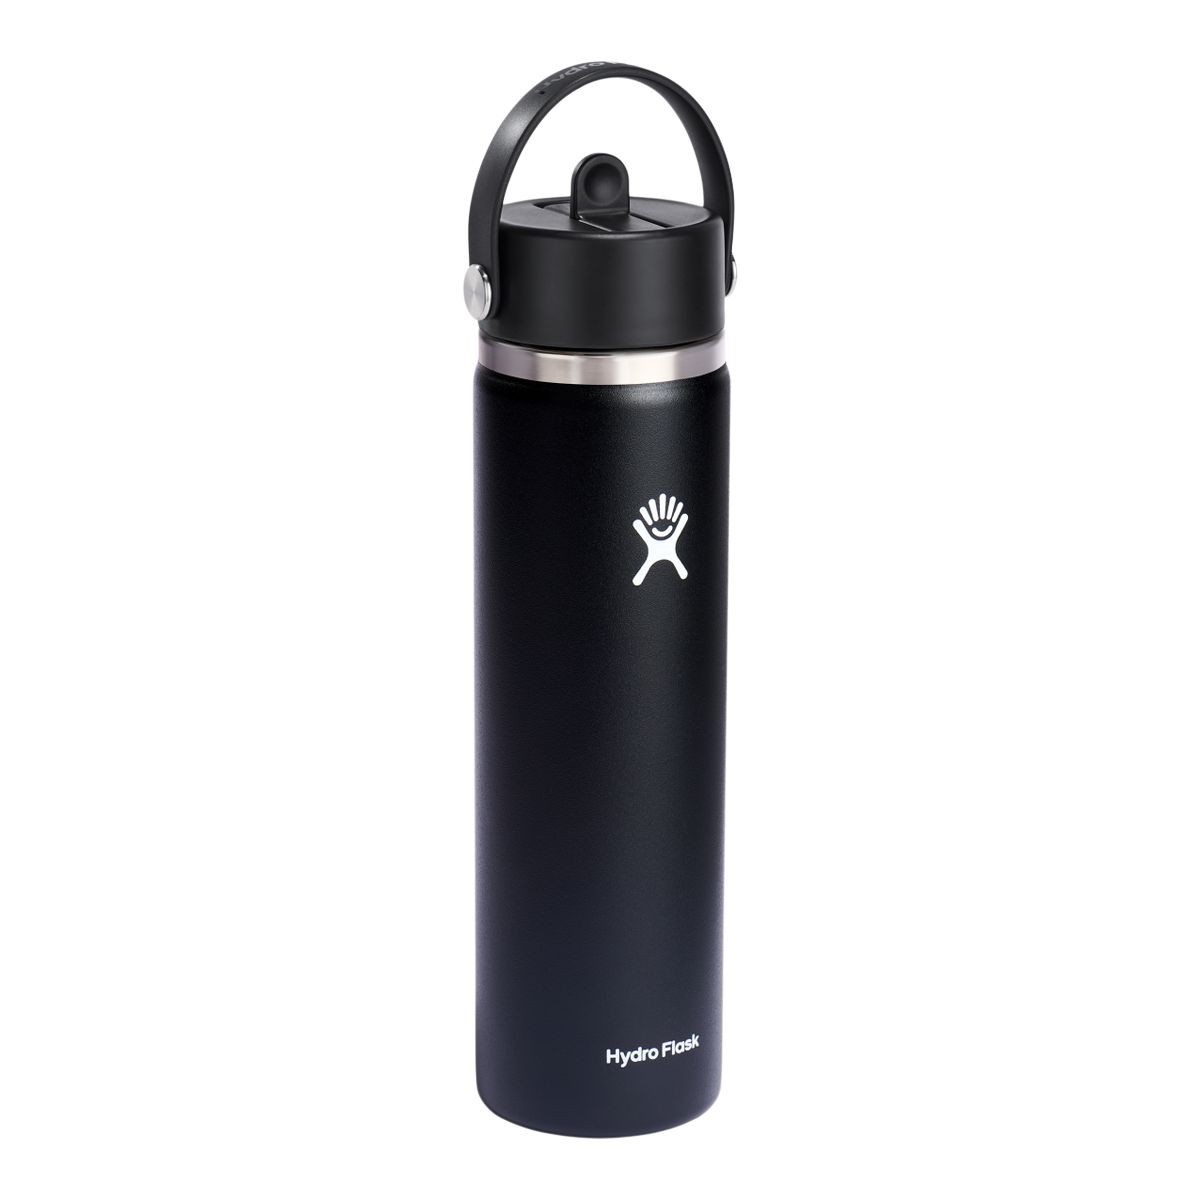 Hydroflask 24 oz Wide Mouth Water Bottle with Flex Straw